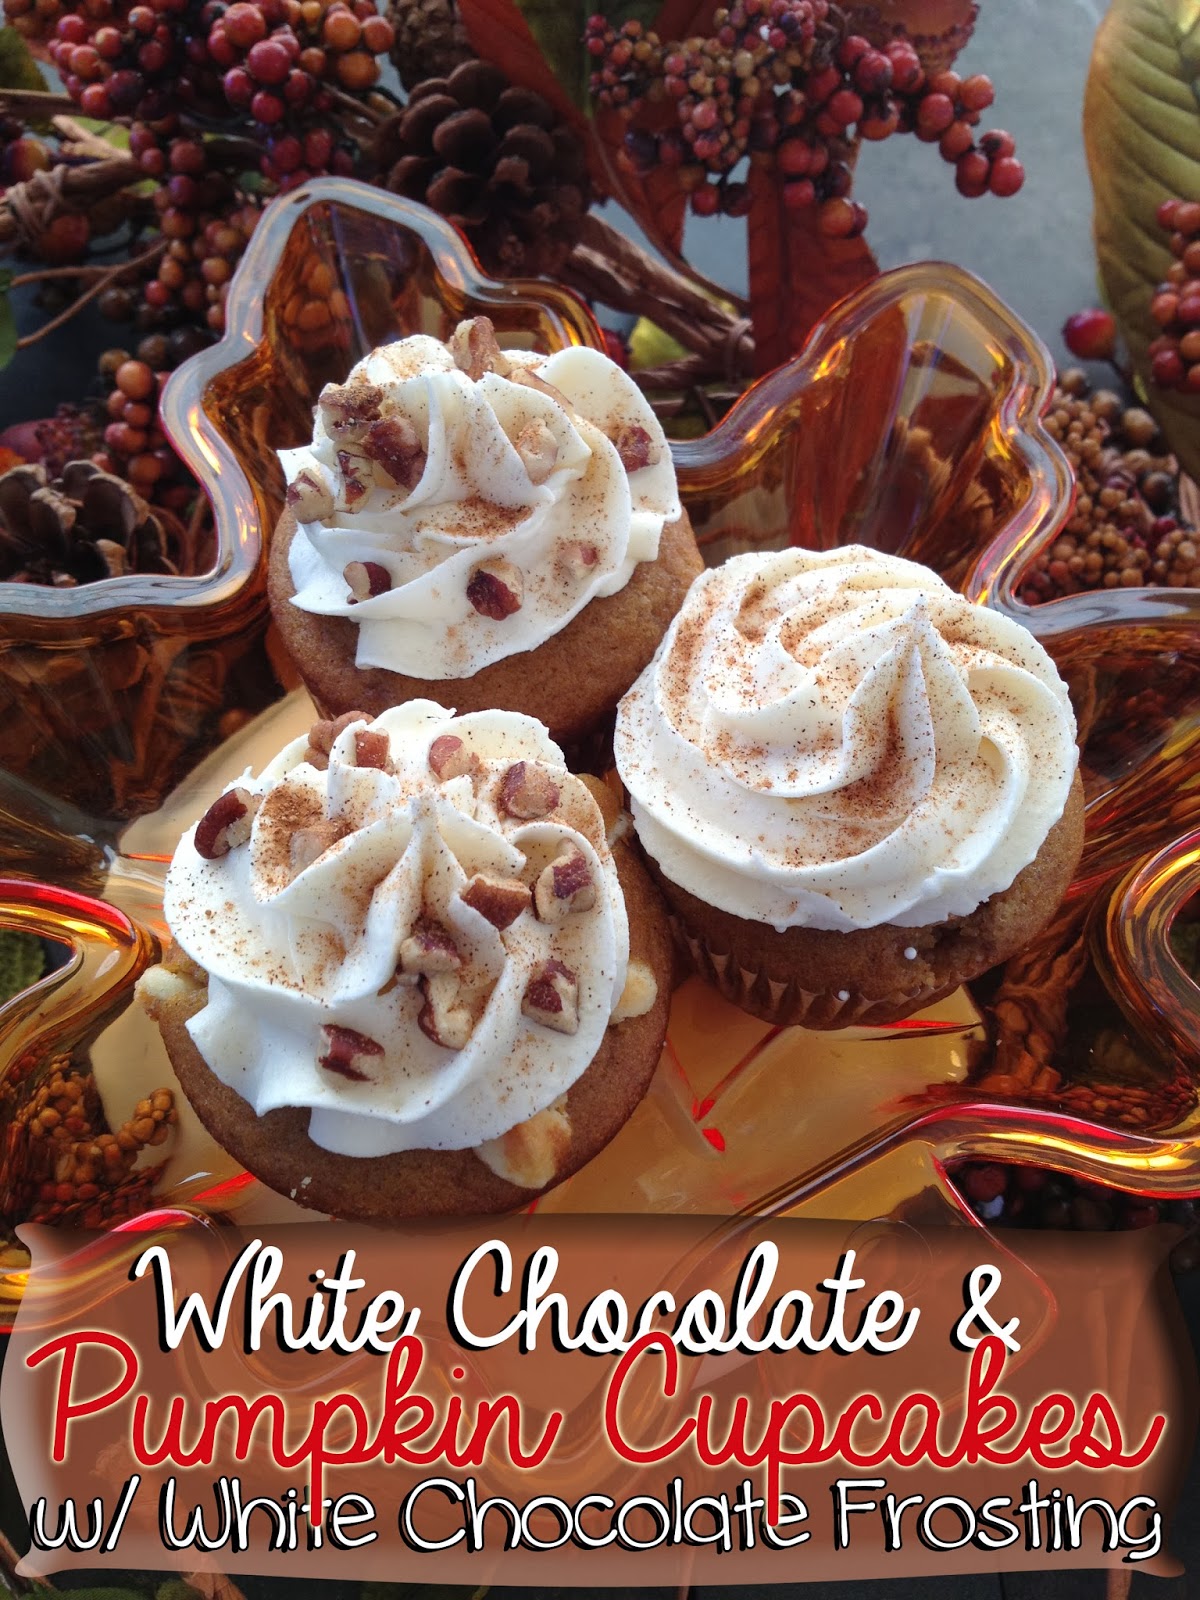 chocolate cupcakes with chocolate icing White Chocolate & Pumpkin Cupcakes with White Chocolate Frosting